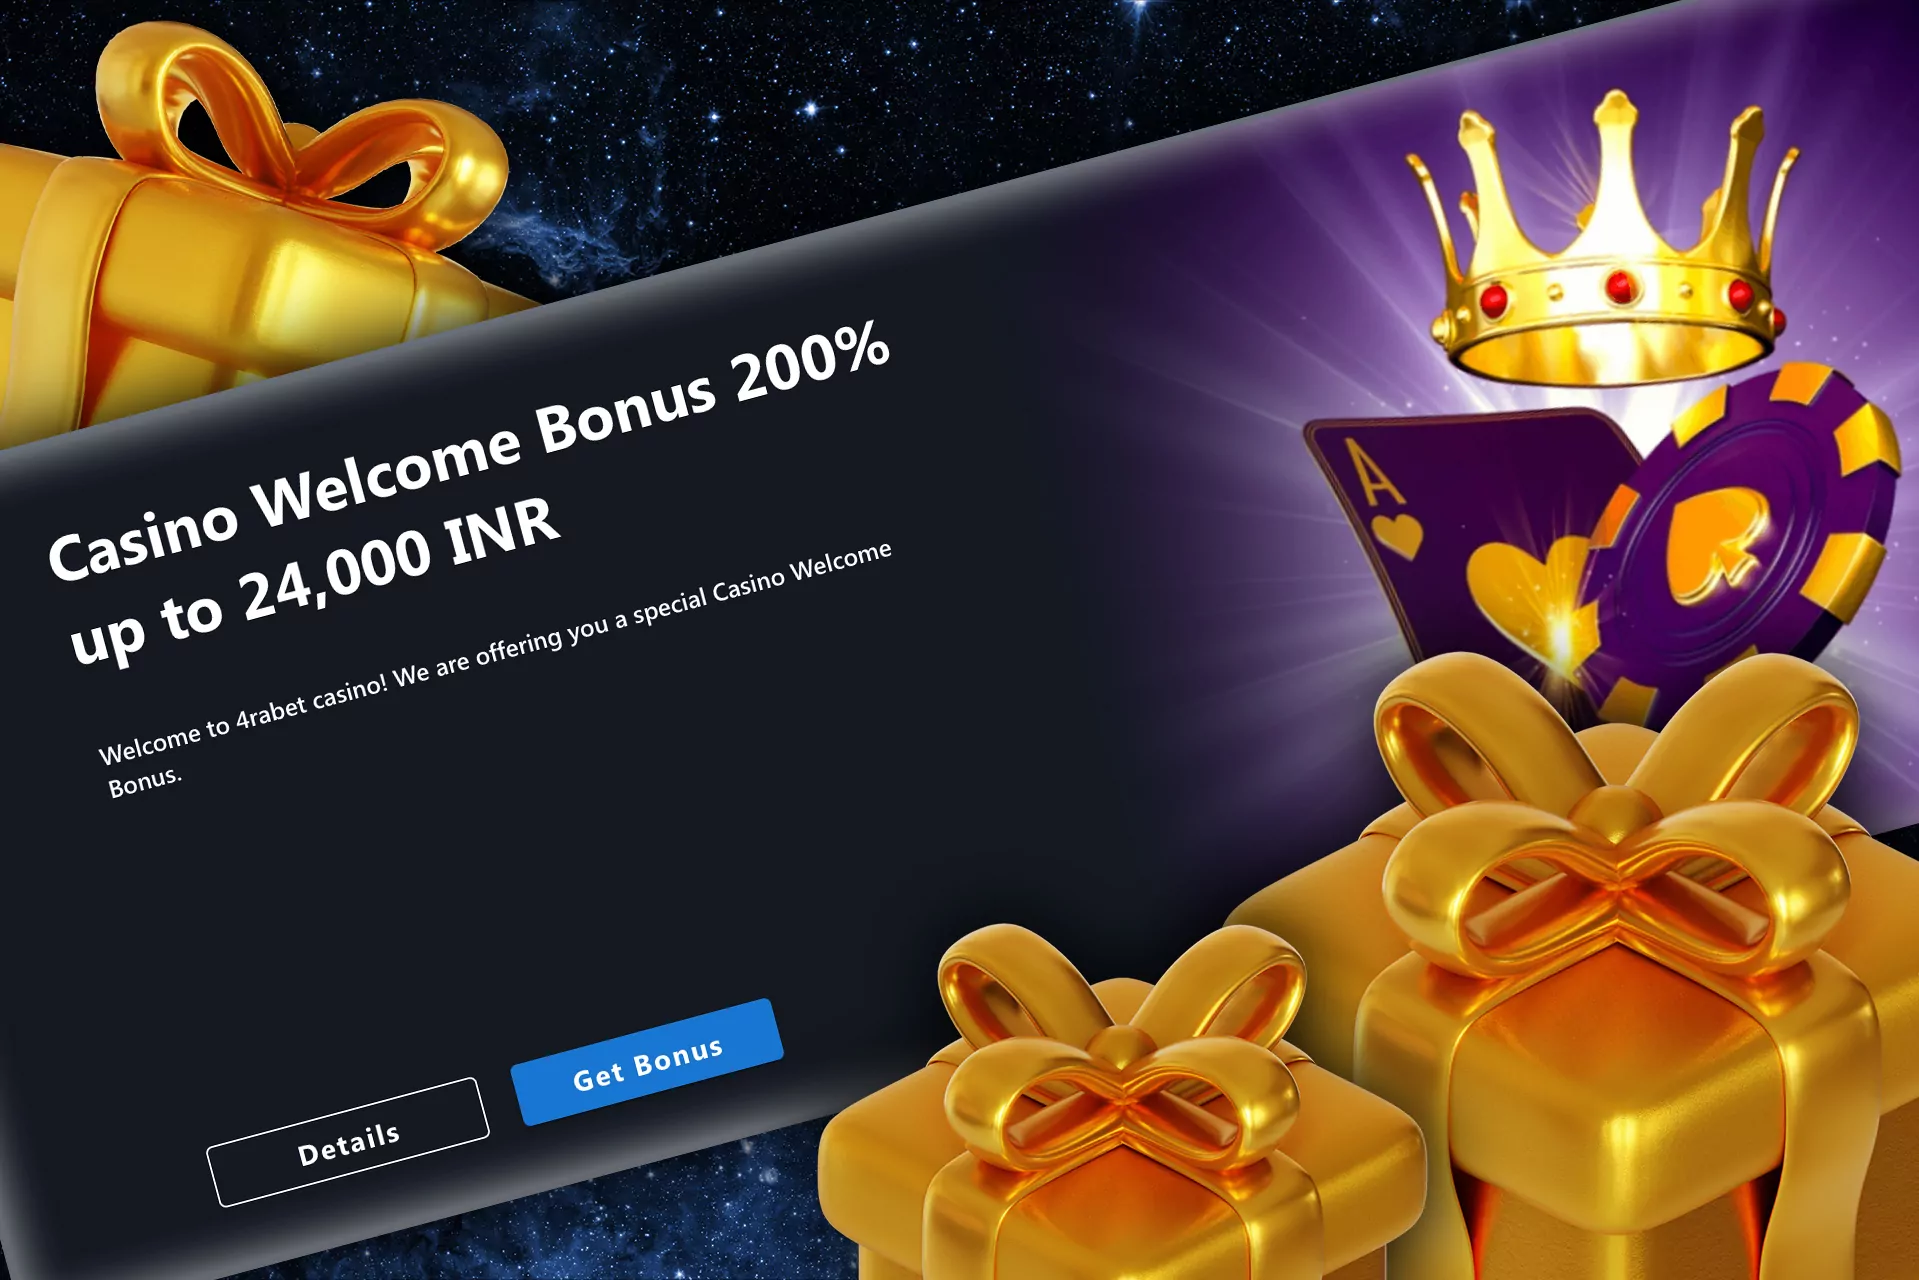 Get up to 24,000 INR as a welcome bonus for casino games.